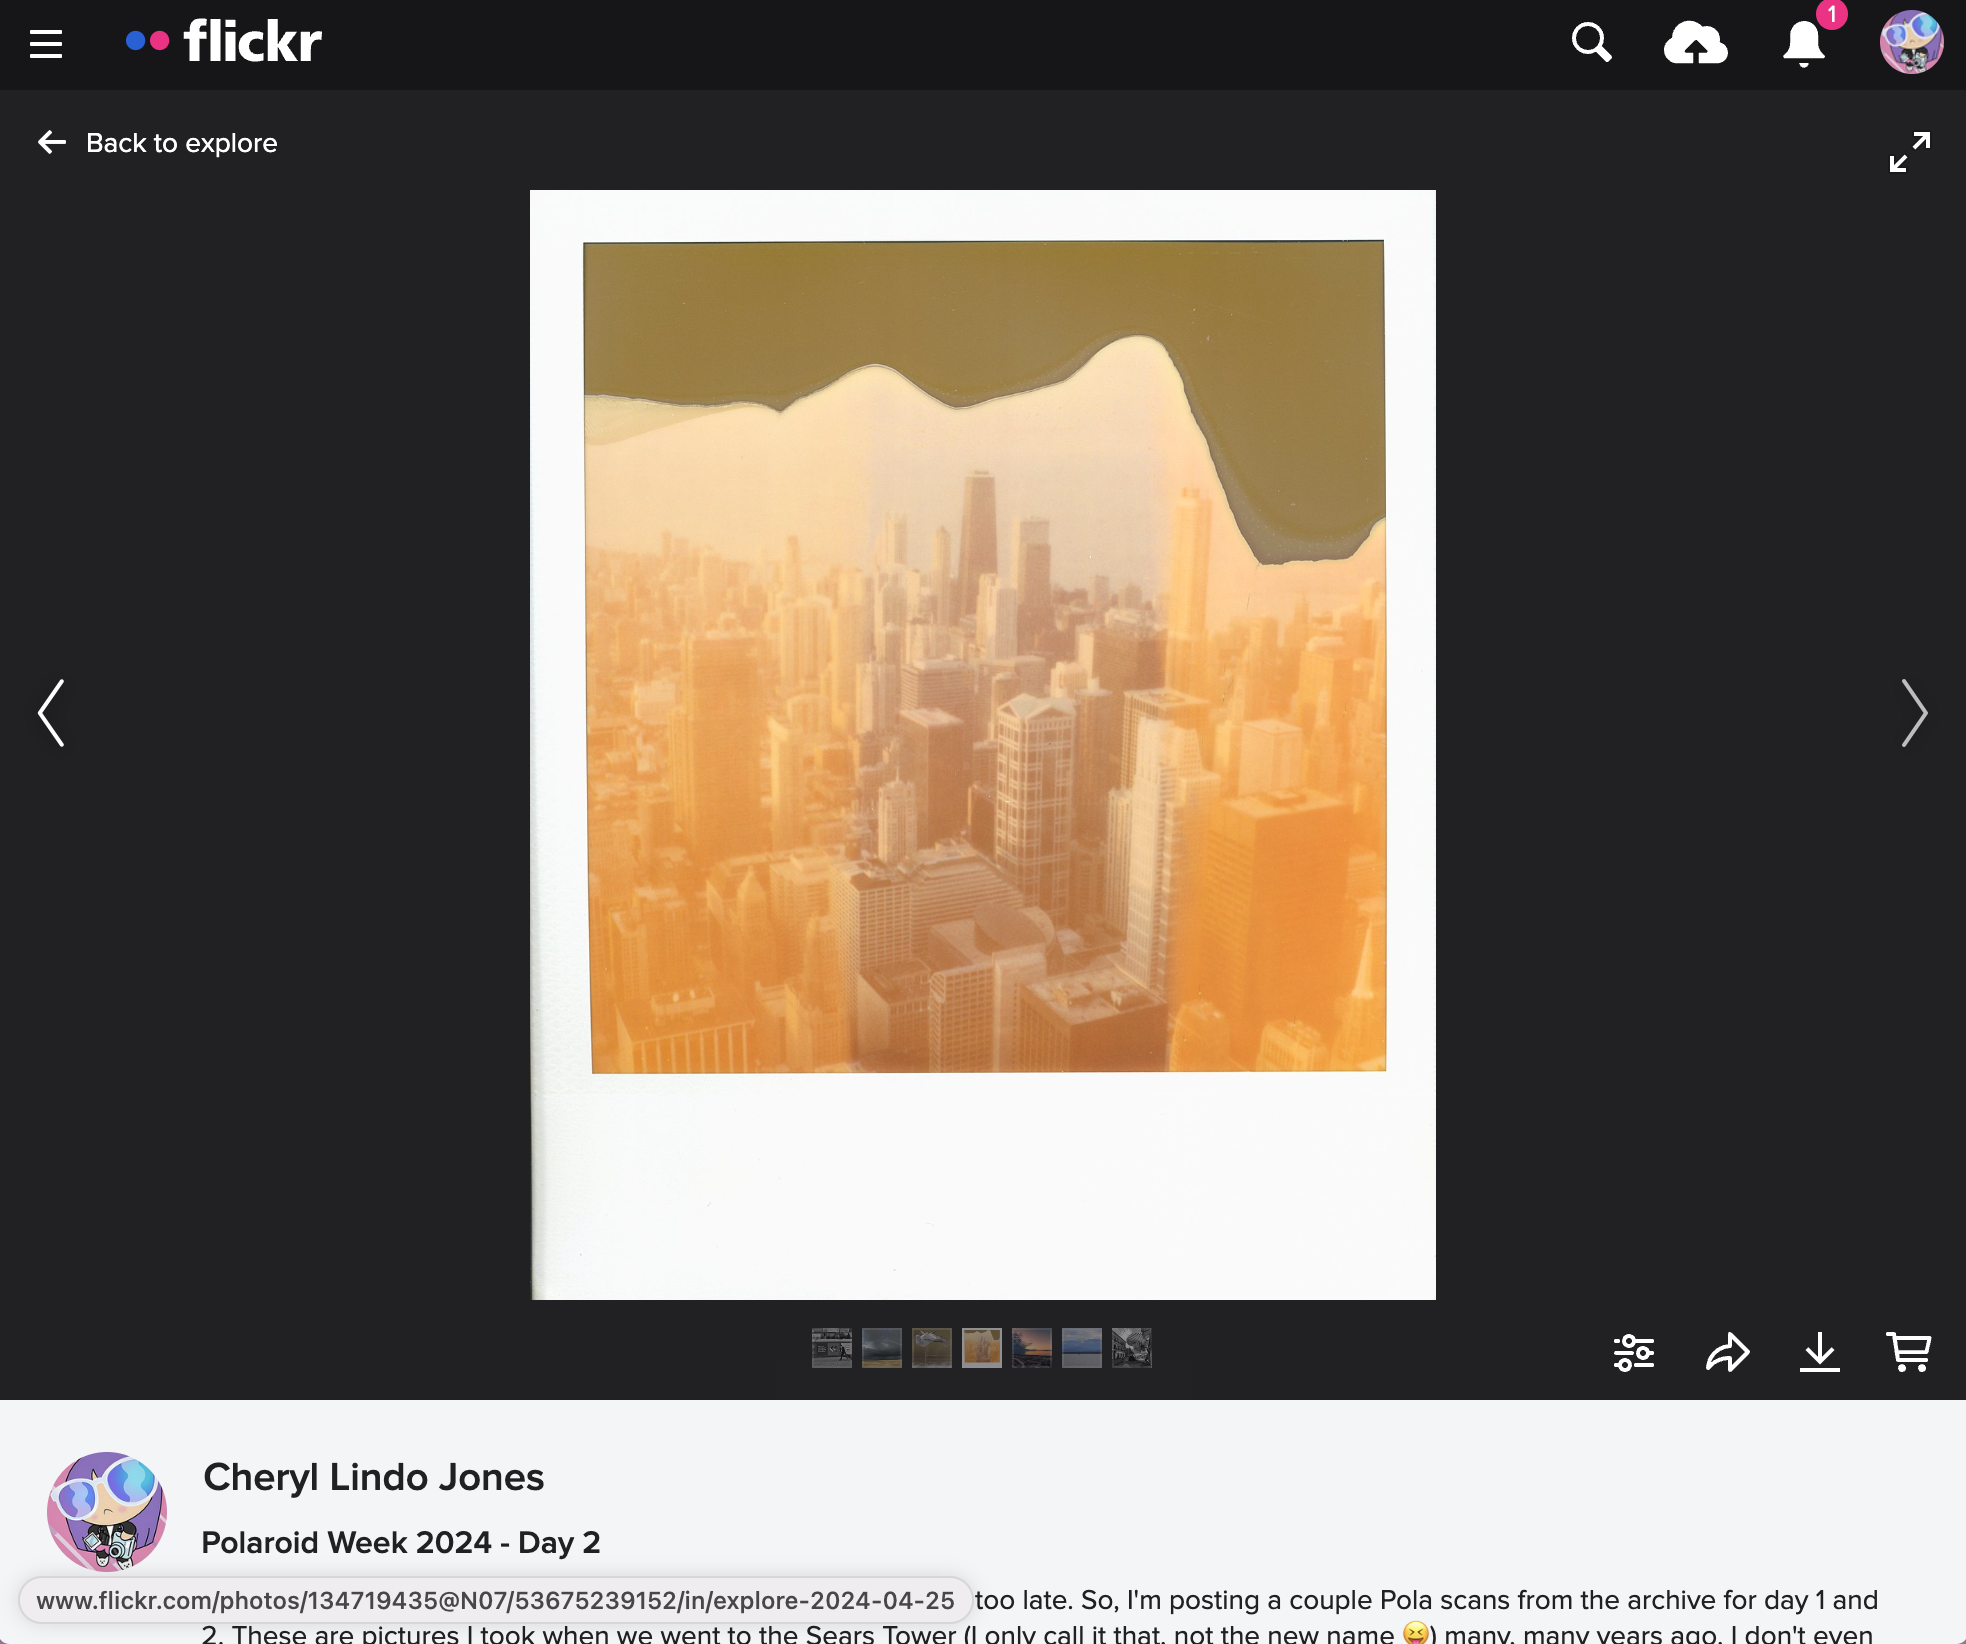 Screenshot of the detail image view on Flickr showing the UI "Back to explore" at the top left, indicating the user opened the photo details from the Explore page